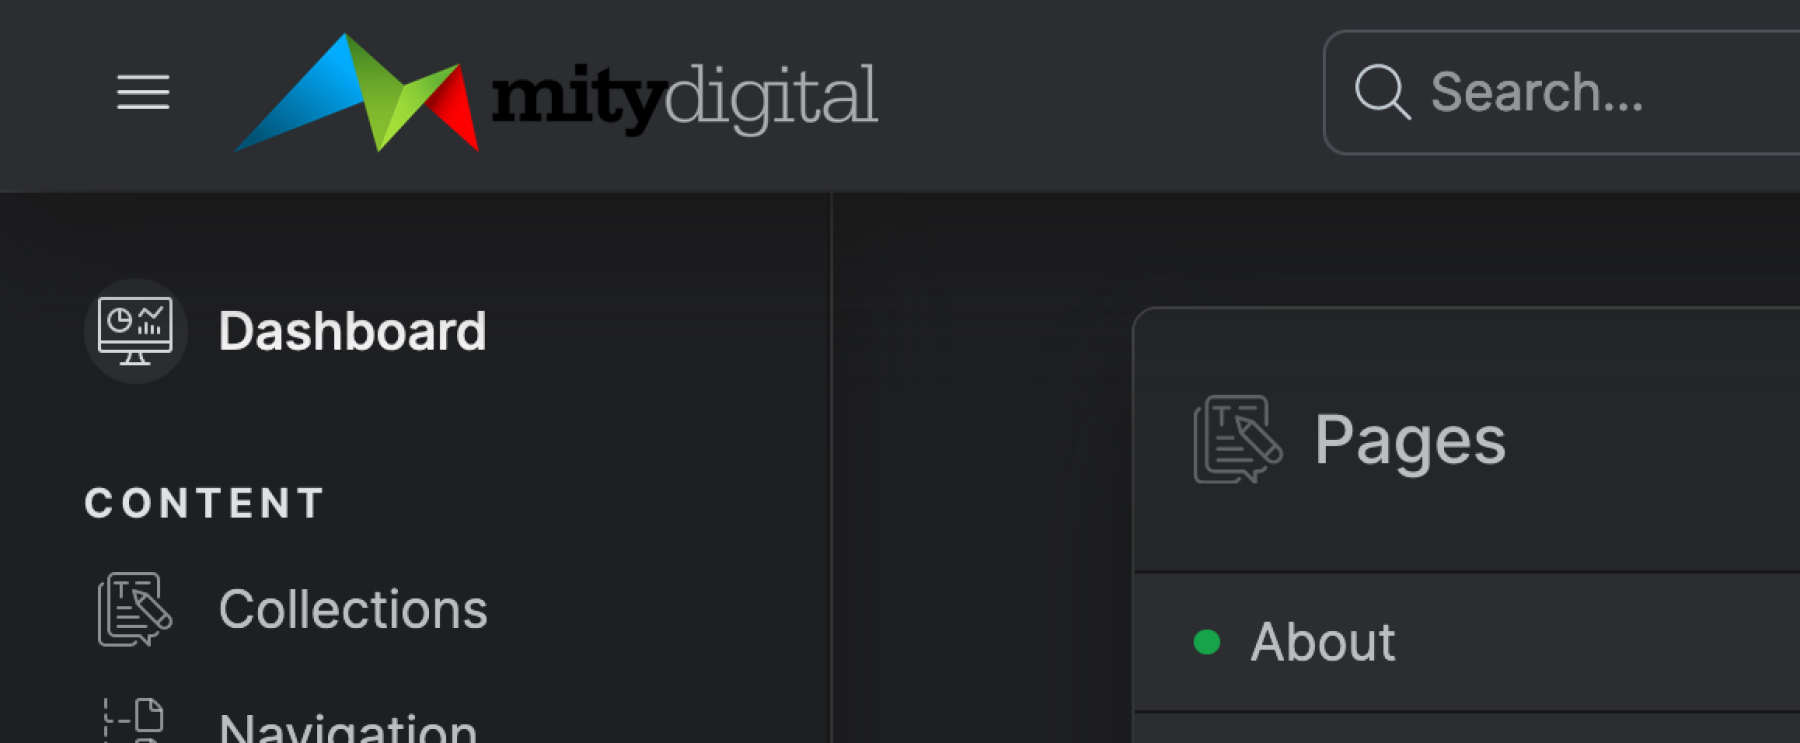 The "Mity Digital" logo doesn't work well on a dark background